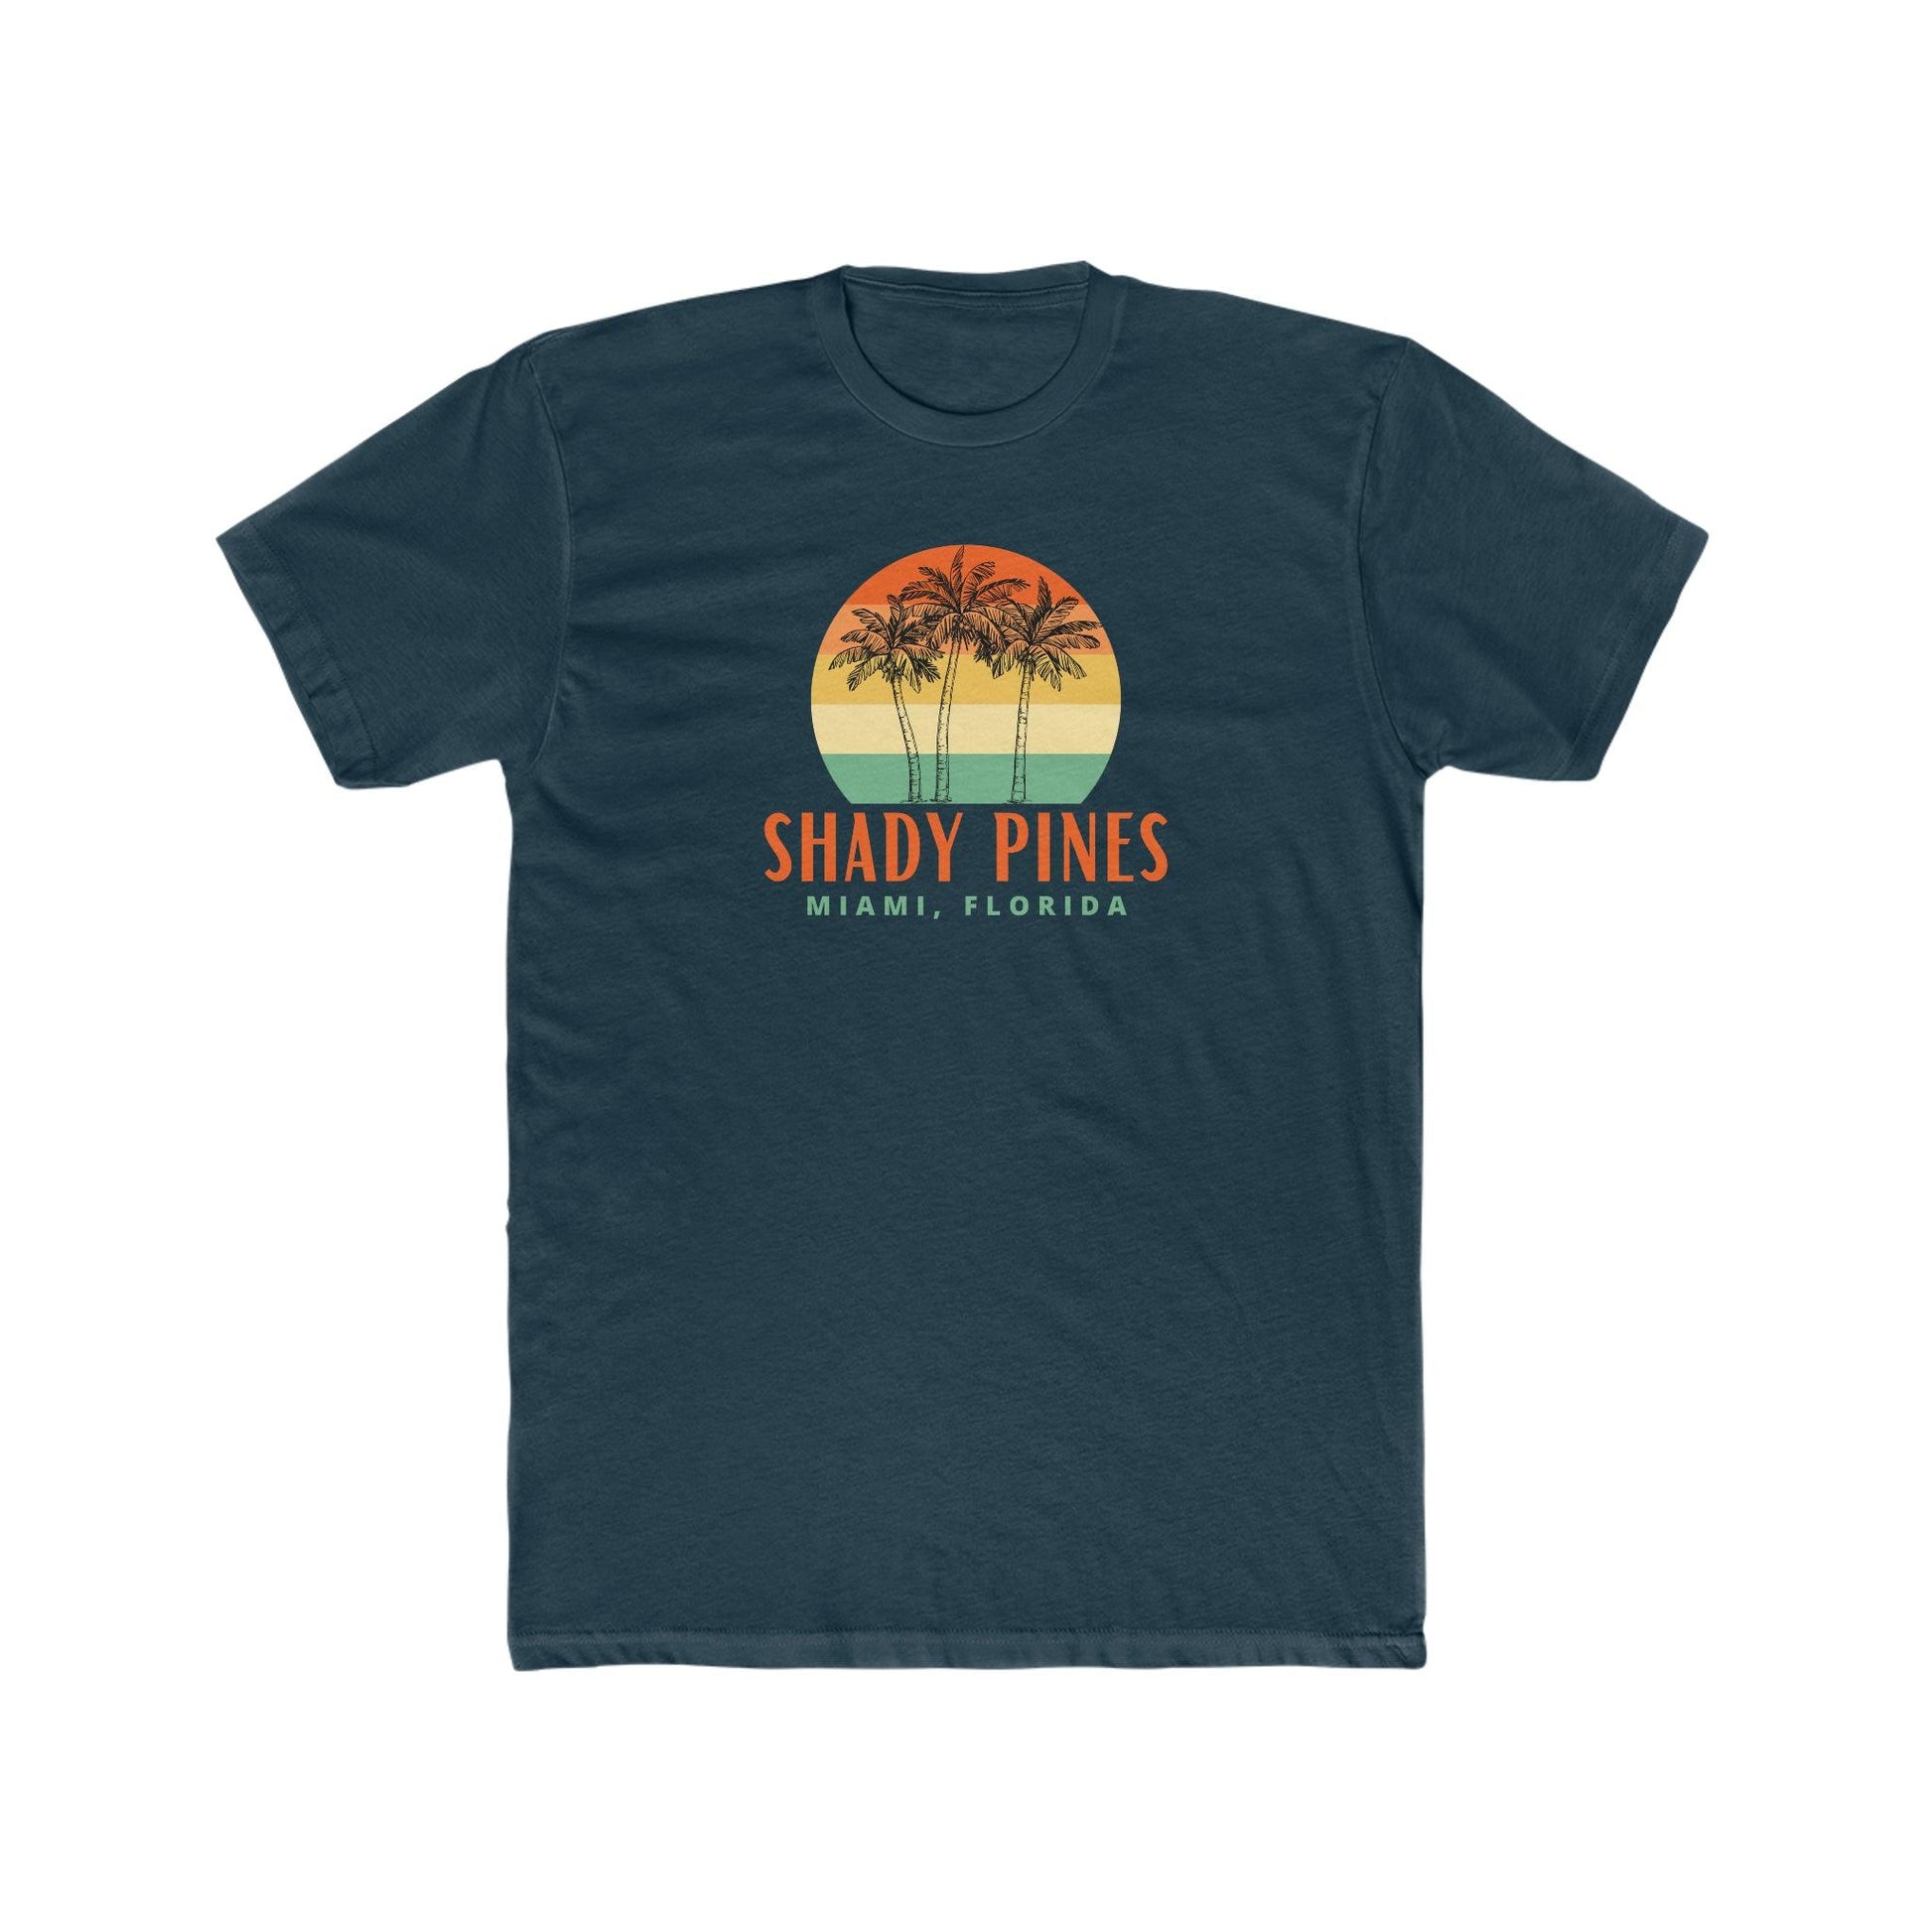 Shady Pines Retirement Home - Wicked Naughty Apparel